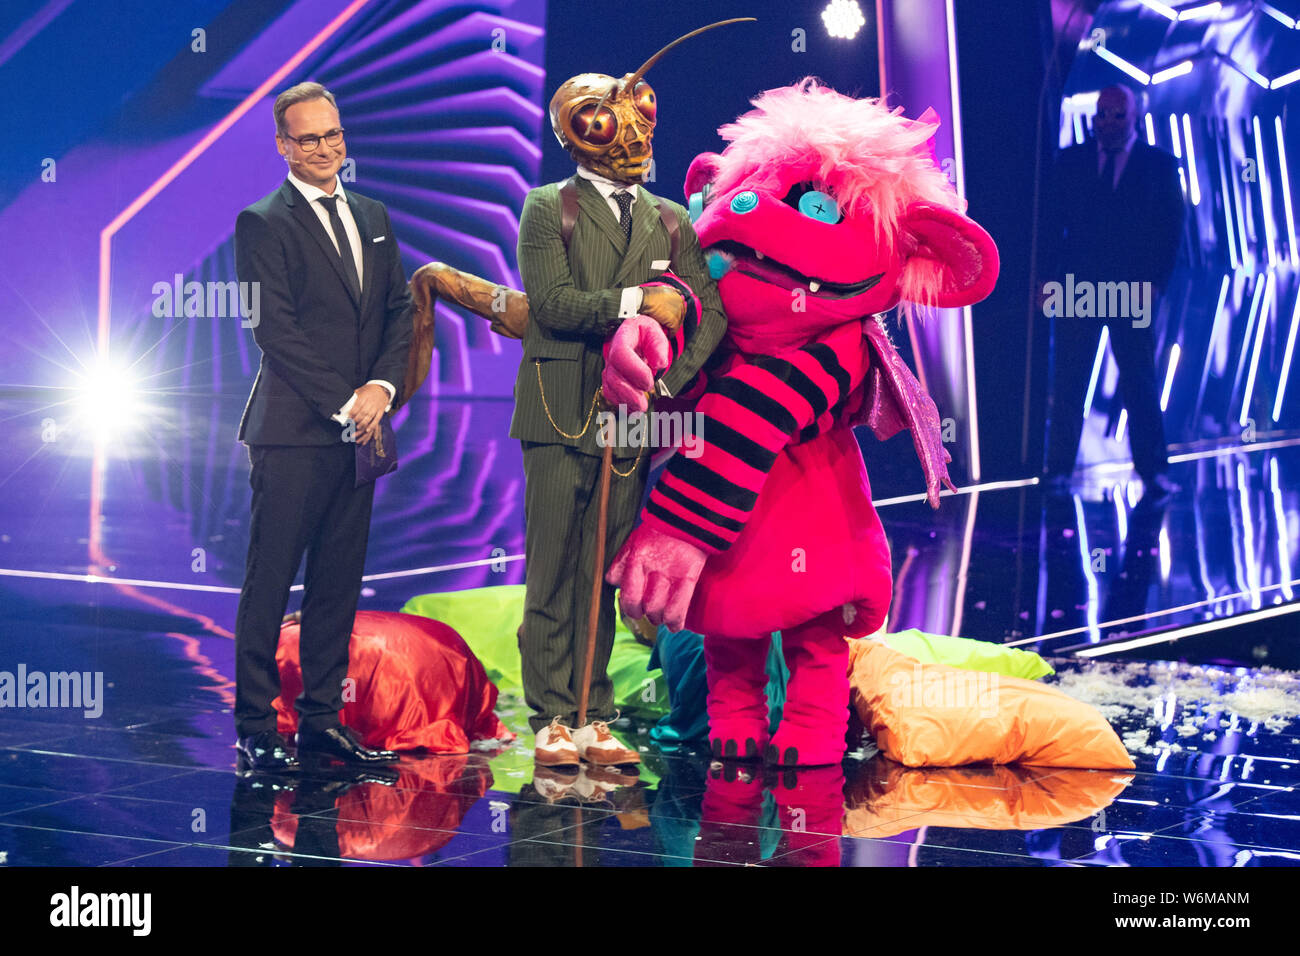 Cologne, Germany. 01st Aug, 2019. The boxer Susianna Kentikian (r) is the  "monster" at the ProSieben show "The Masked Singer" on stage next to the  character "Grashüpfer" (M) and presenter Matthias Opdenhövel (